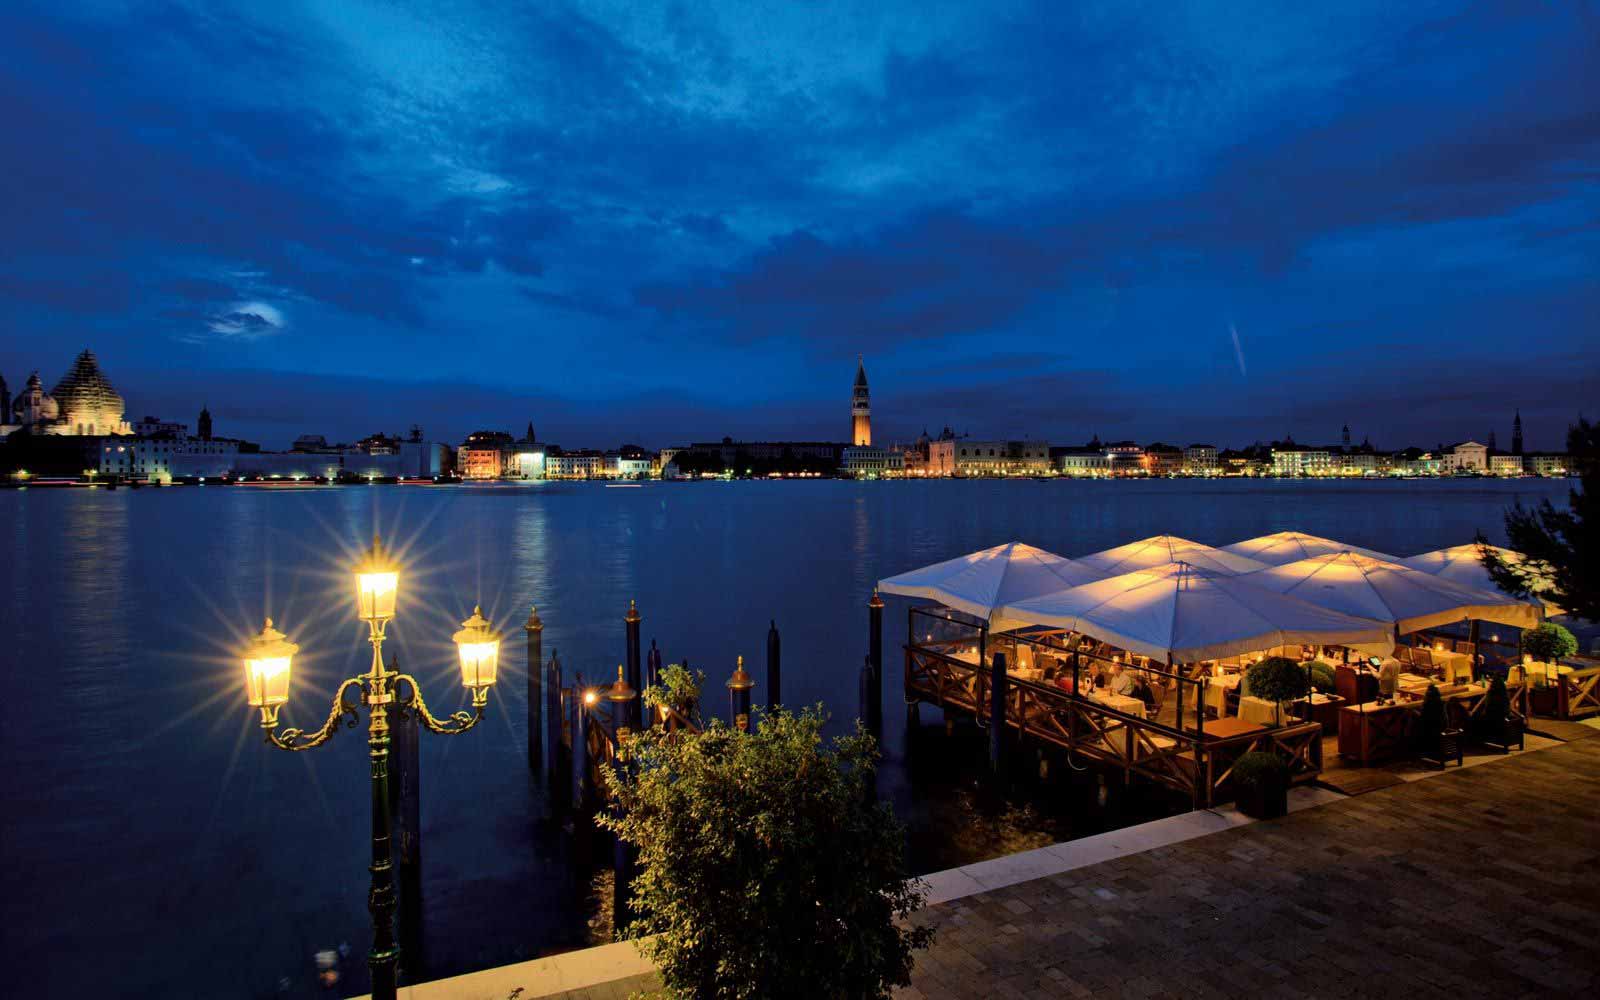 Restaurant by the river at Belmond Hotel Cipriani